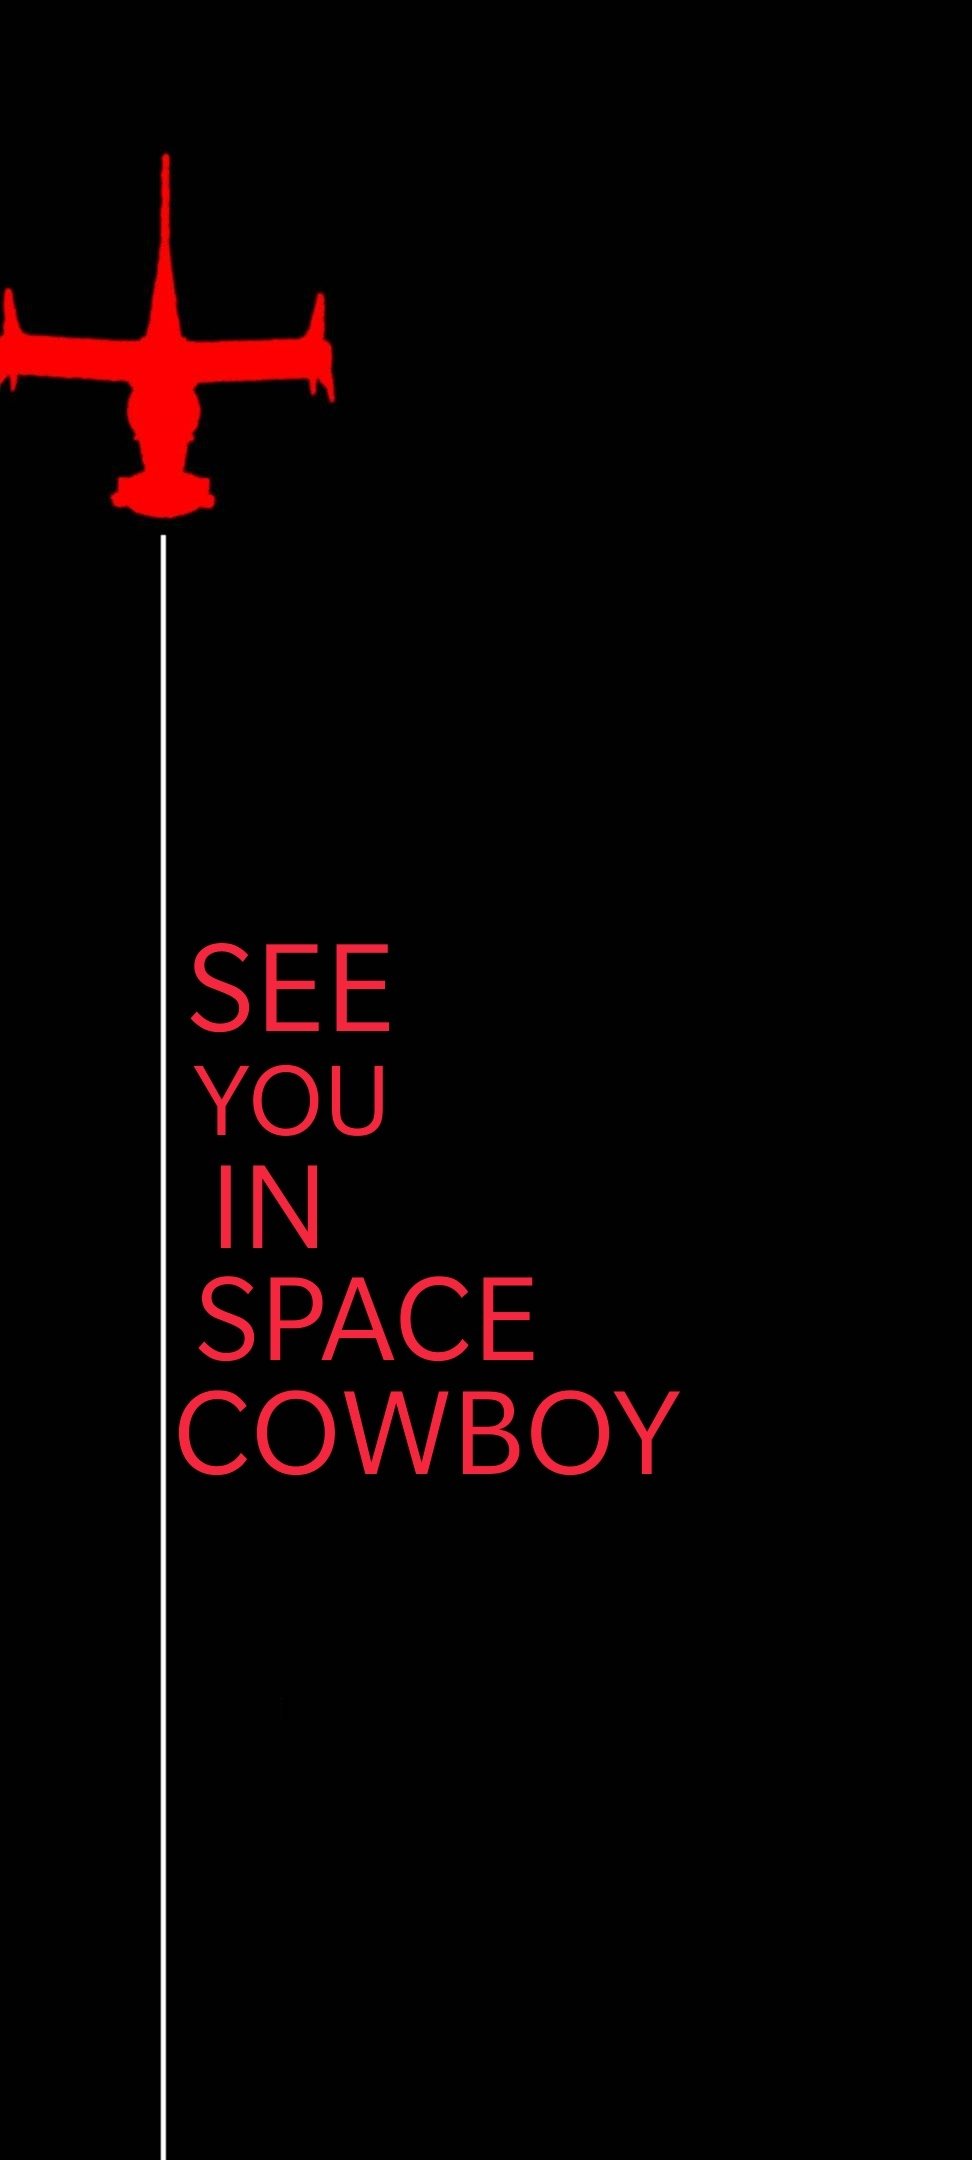 Shawn Of Nssg I Made My Own Cowboy Bebop Wallpaper For My Lock Screen Cowboybebop Wallpaper T Co Vn1rswoqnk Twitter